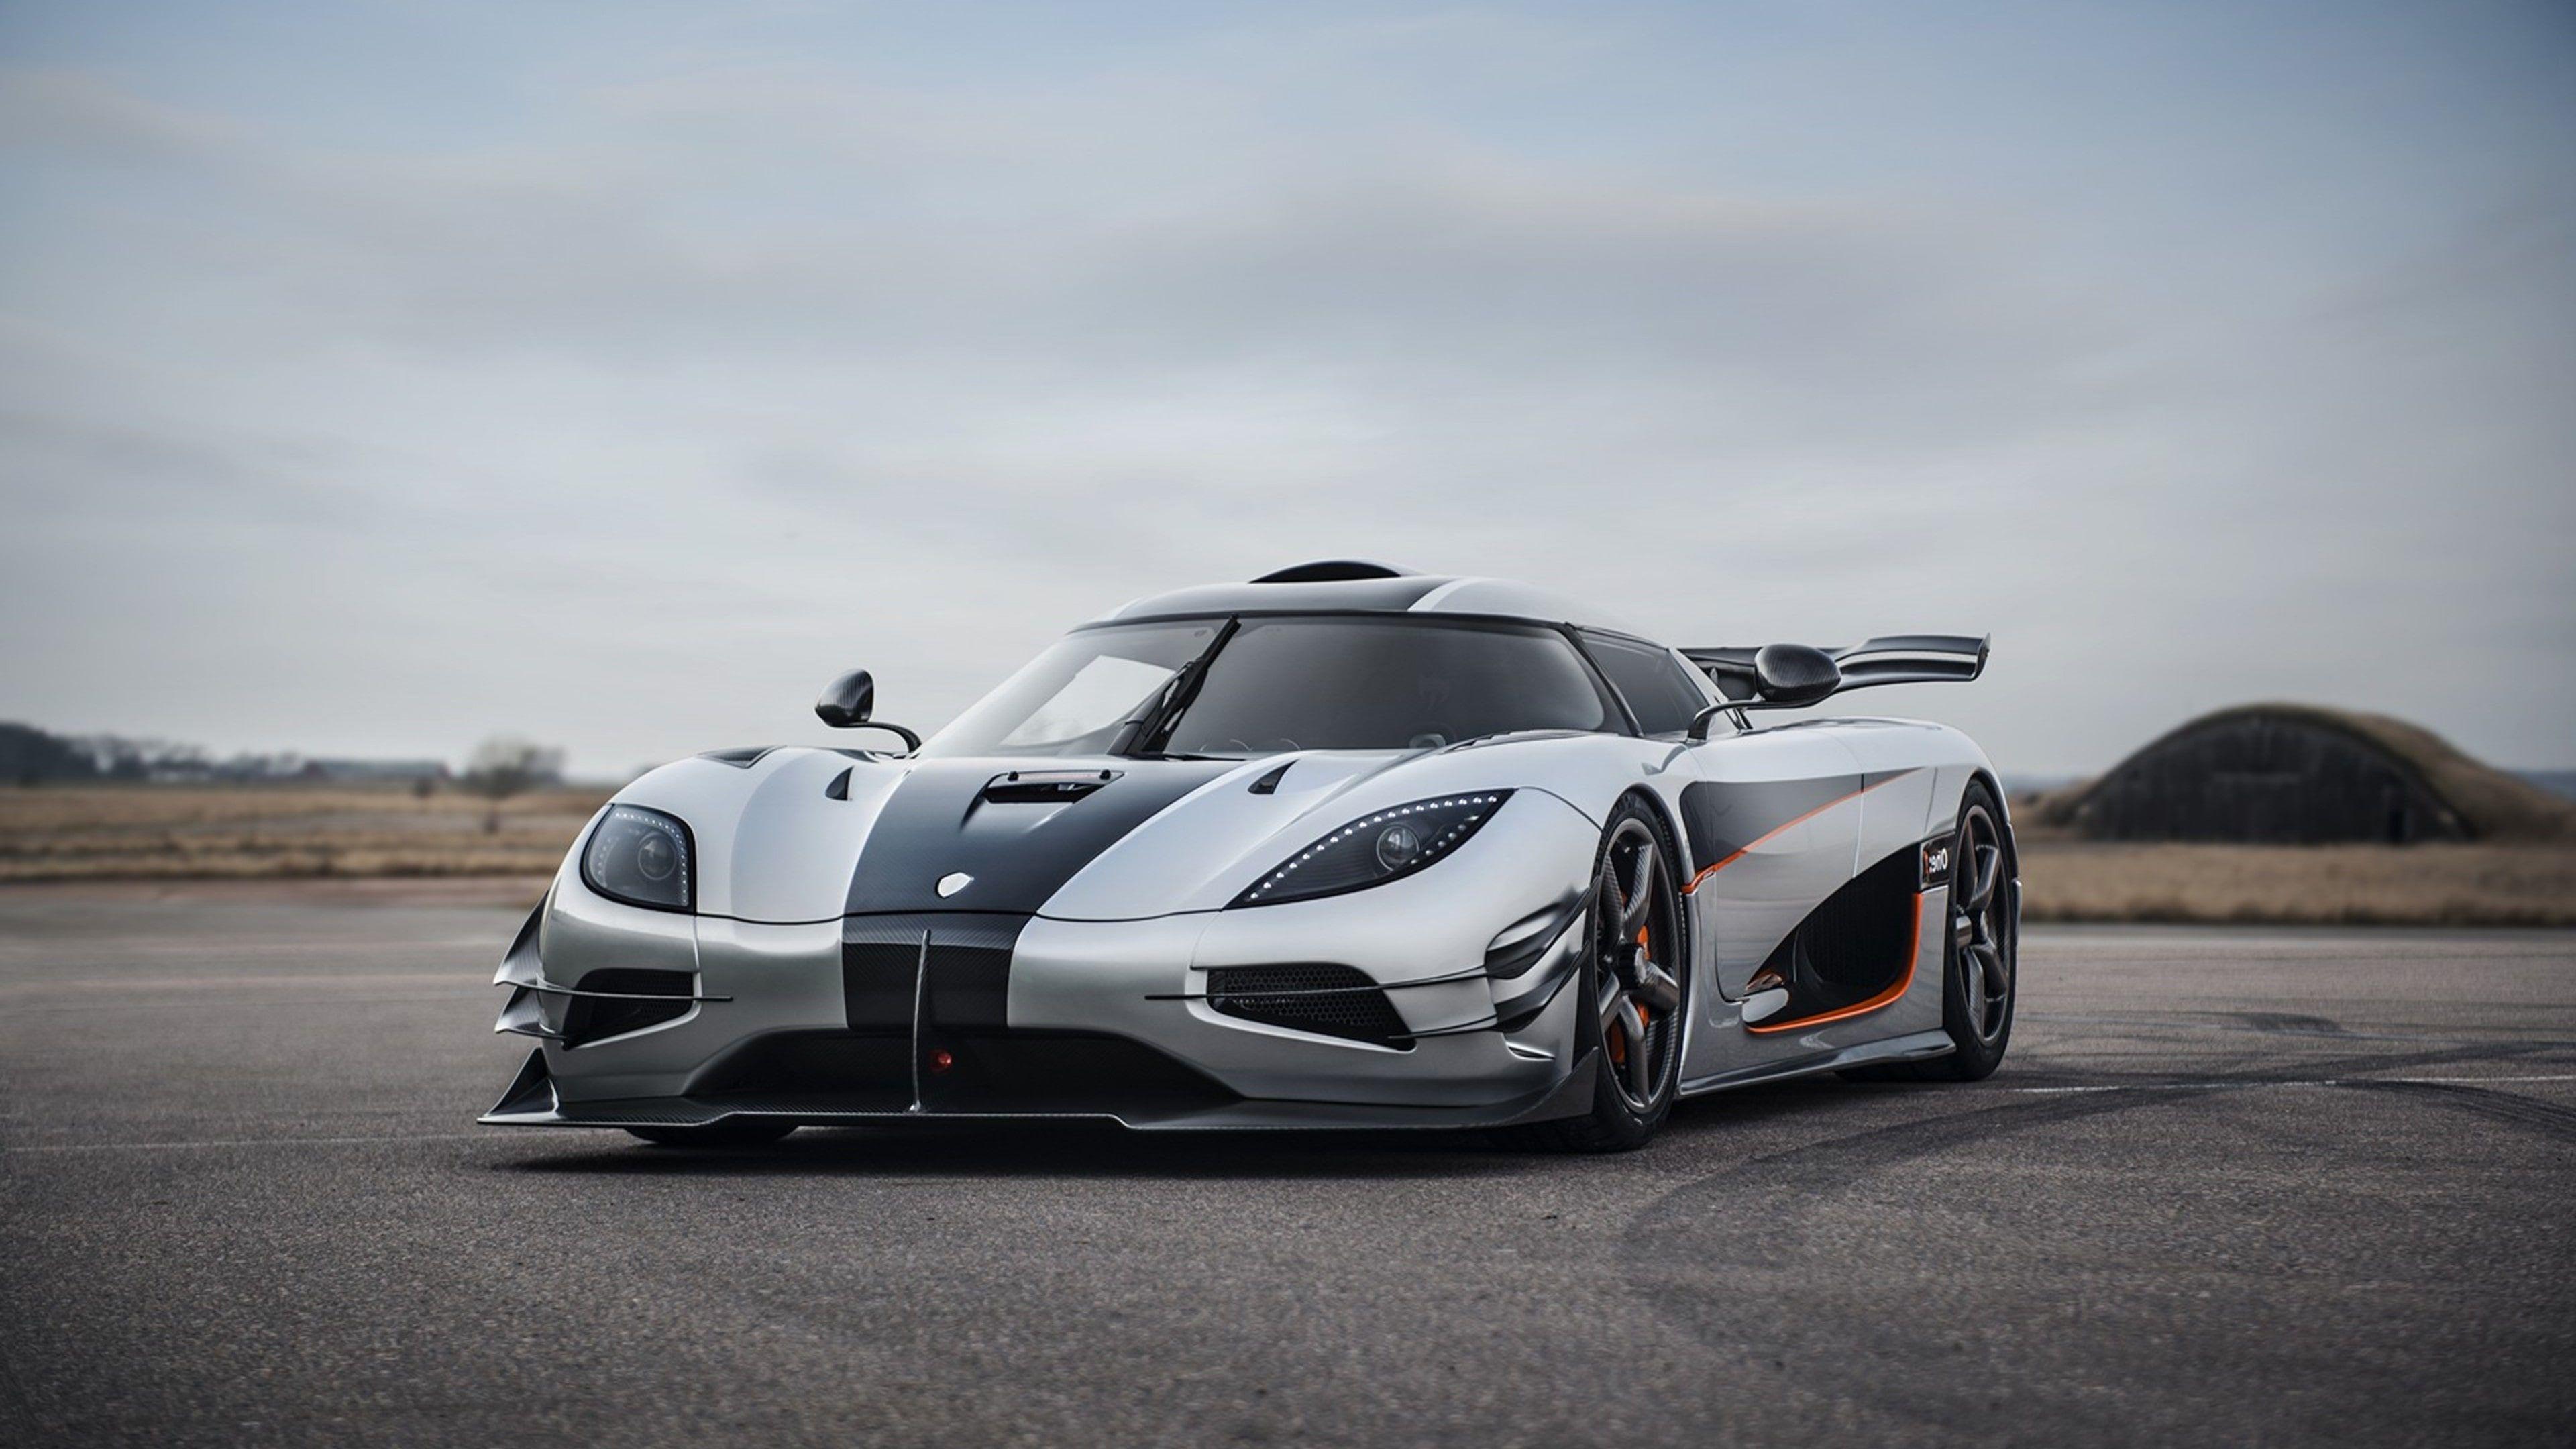 Can T Wait 4 Years Buy This Koenigsegg Agera R From Switzerland Carscoops Koenigsegg Super Cars Hot Cars